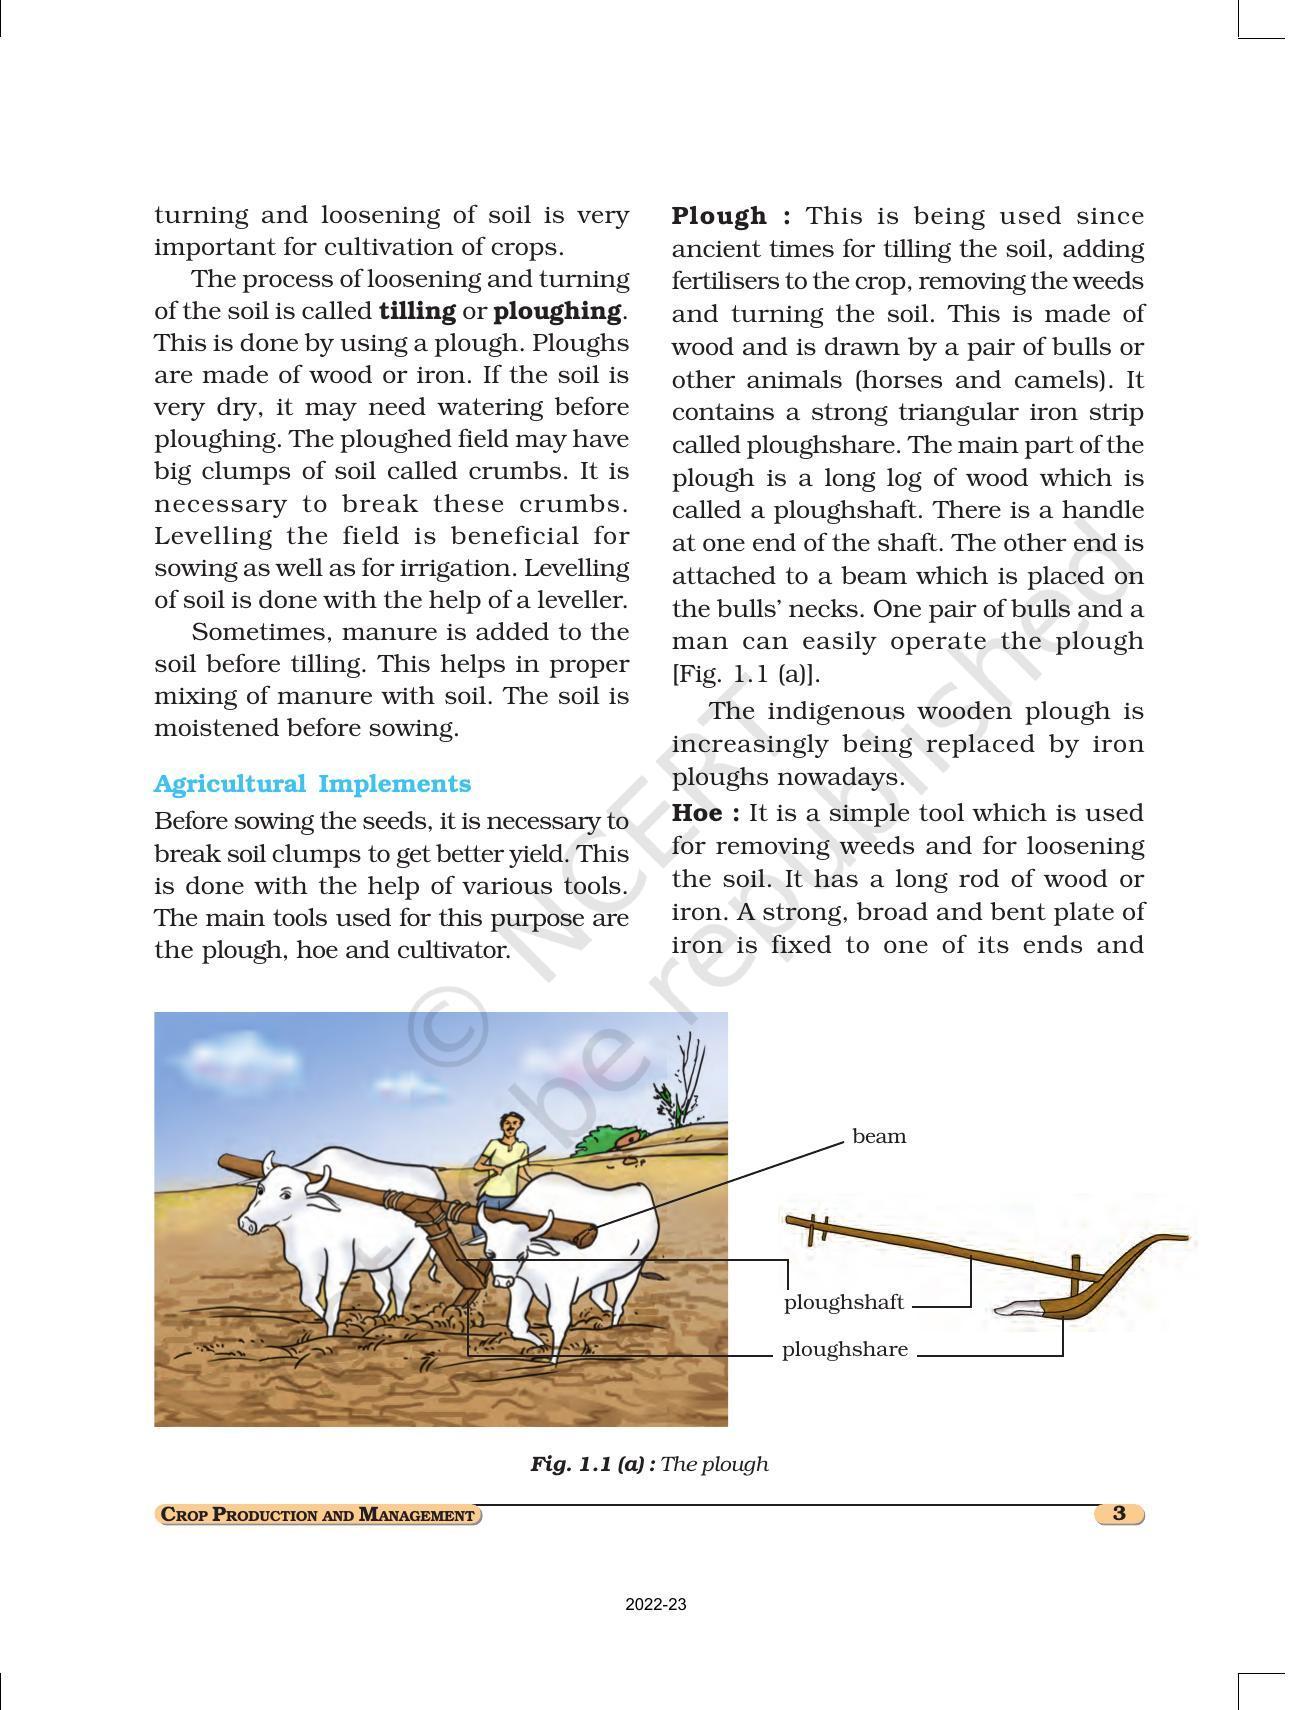 NCERT Book for Class 8 Science Chapter 1 Crop Production and Management - Page 3